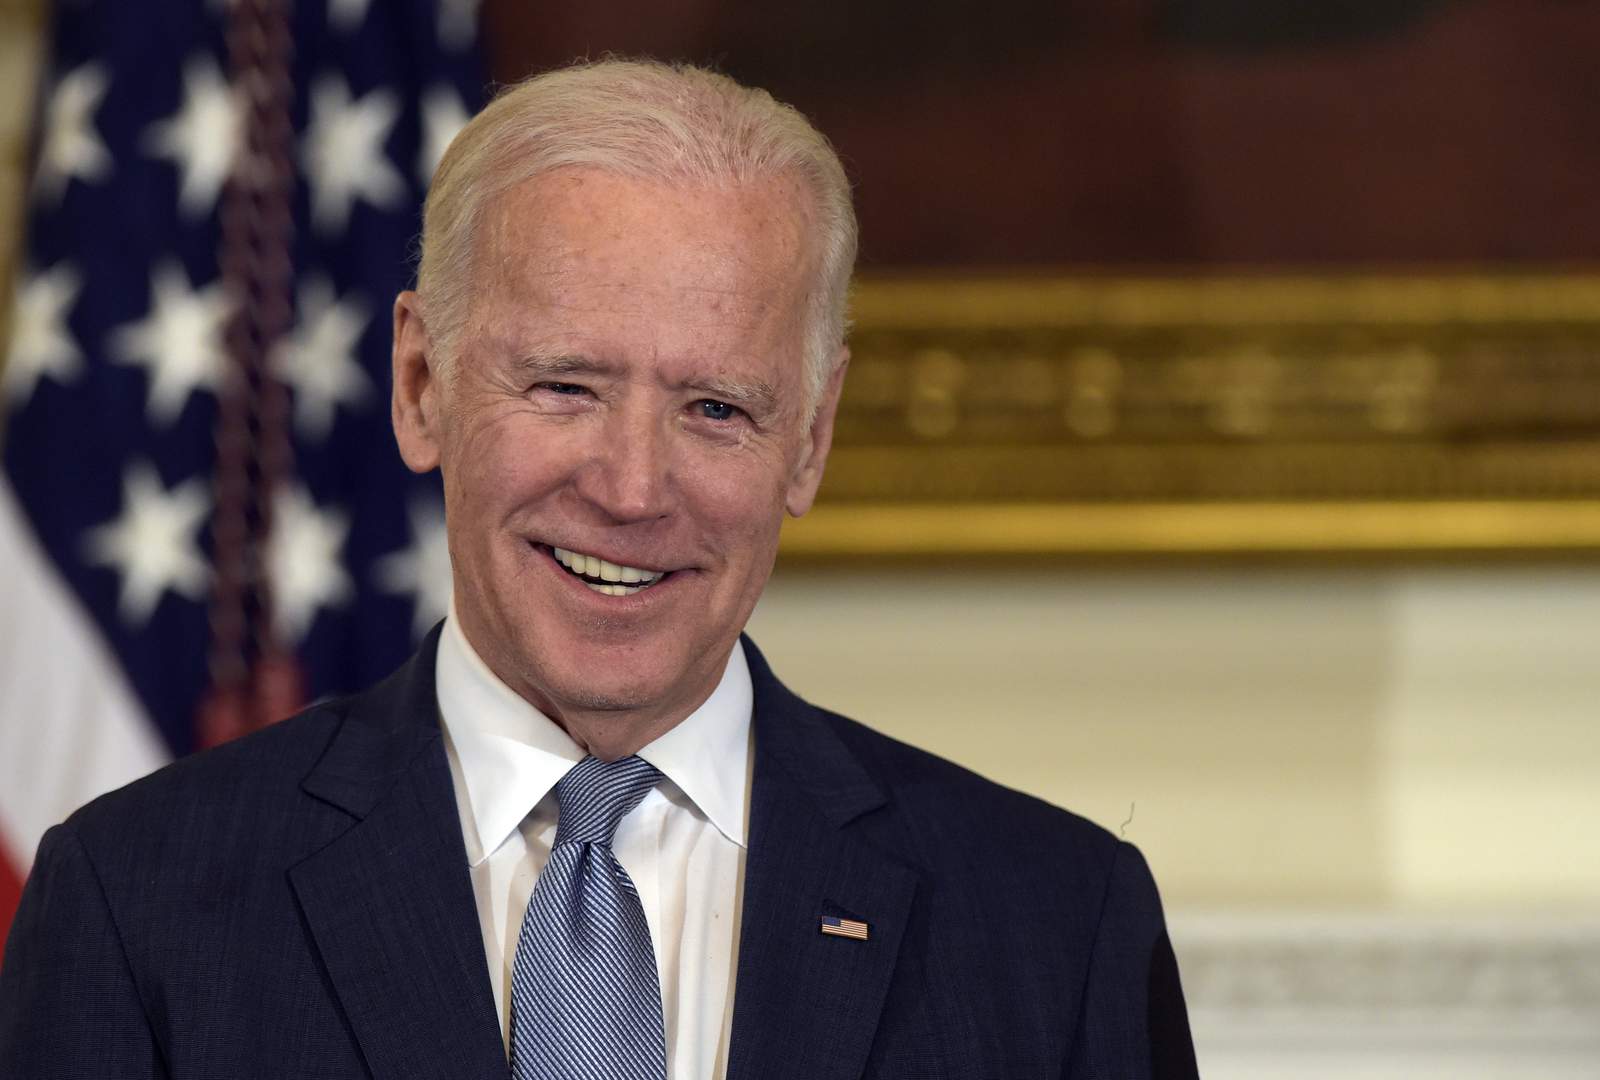 He made a mistake,' Michigan Democratic Partys Black Caucus chair says about Biden